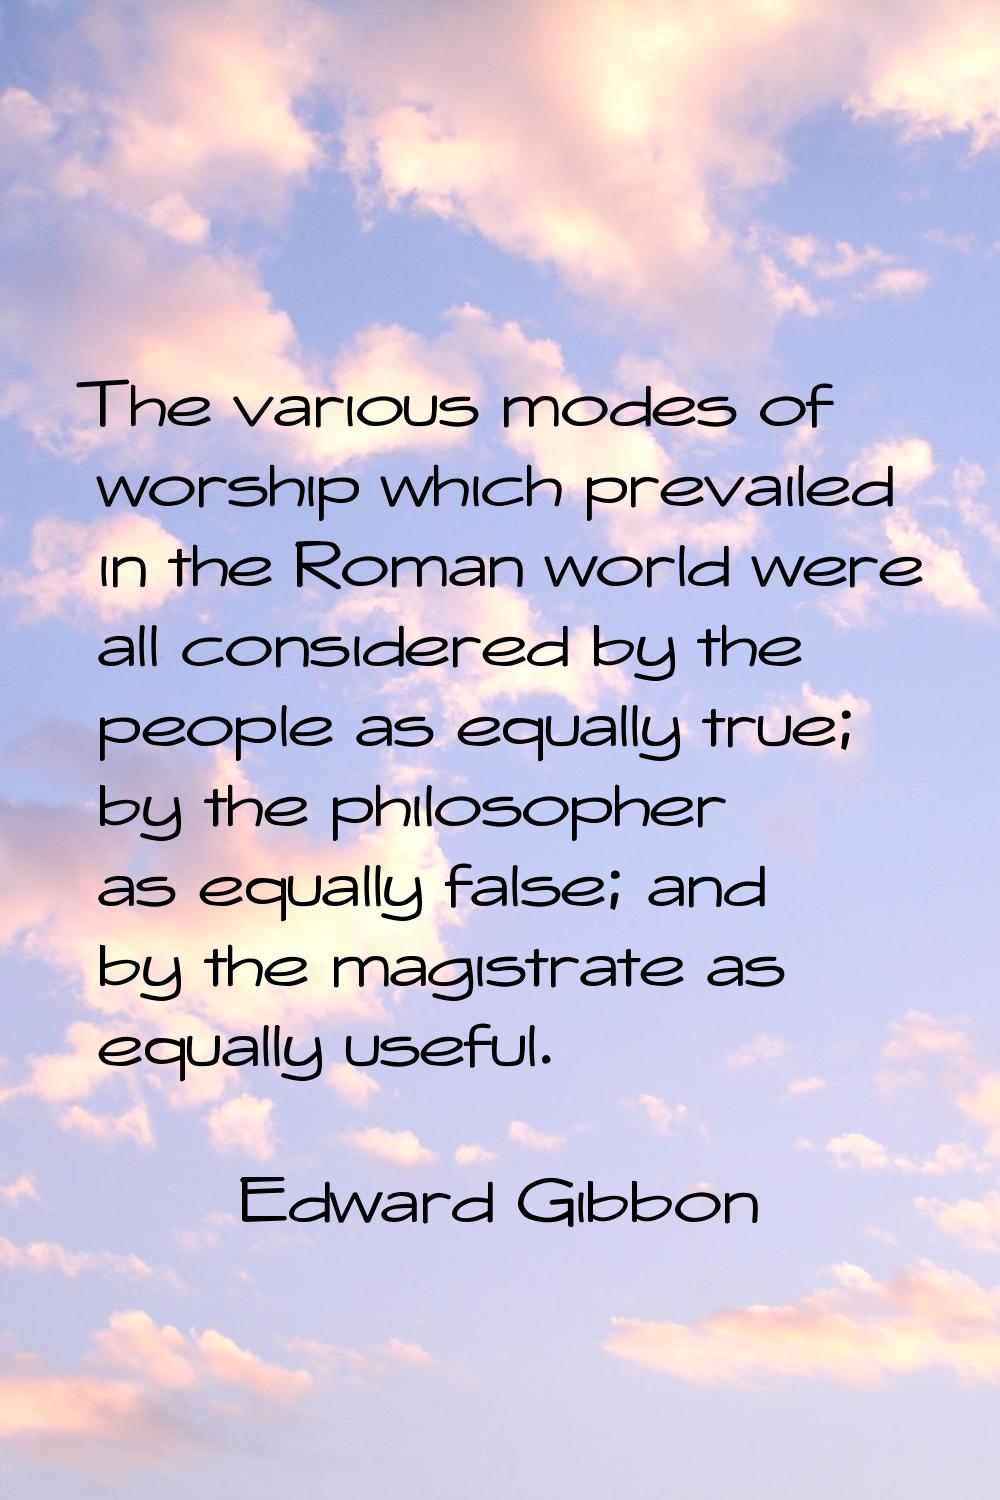 The various modes of worship which prevailed in the Roman world were all considered by the people a